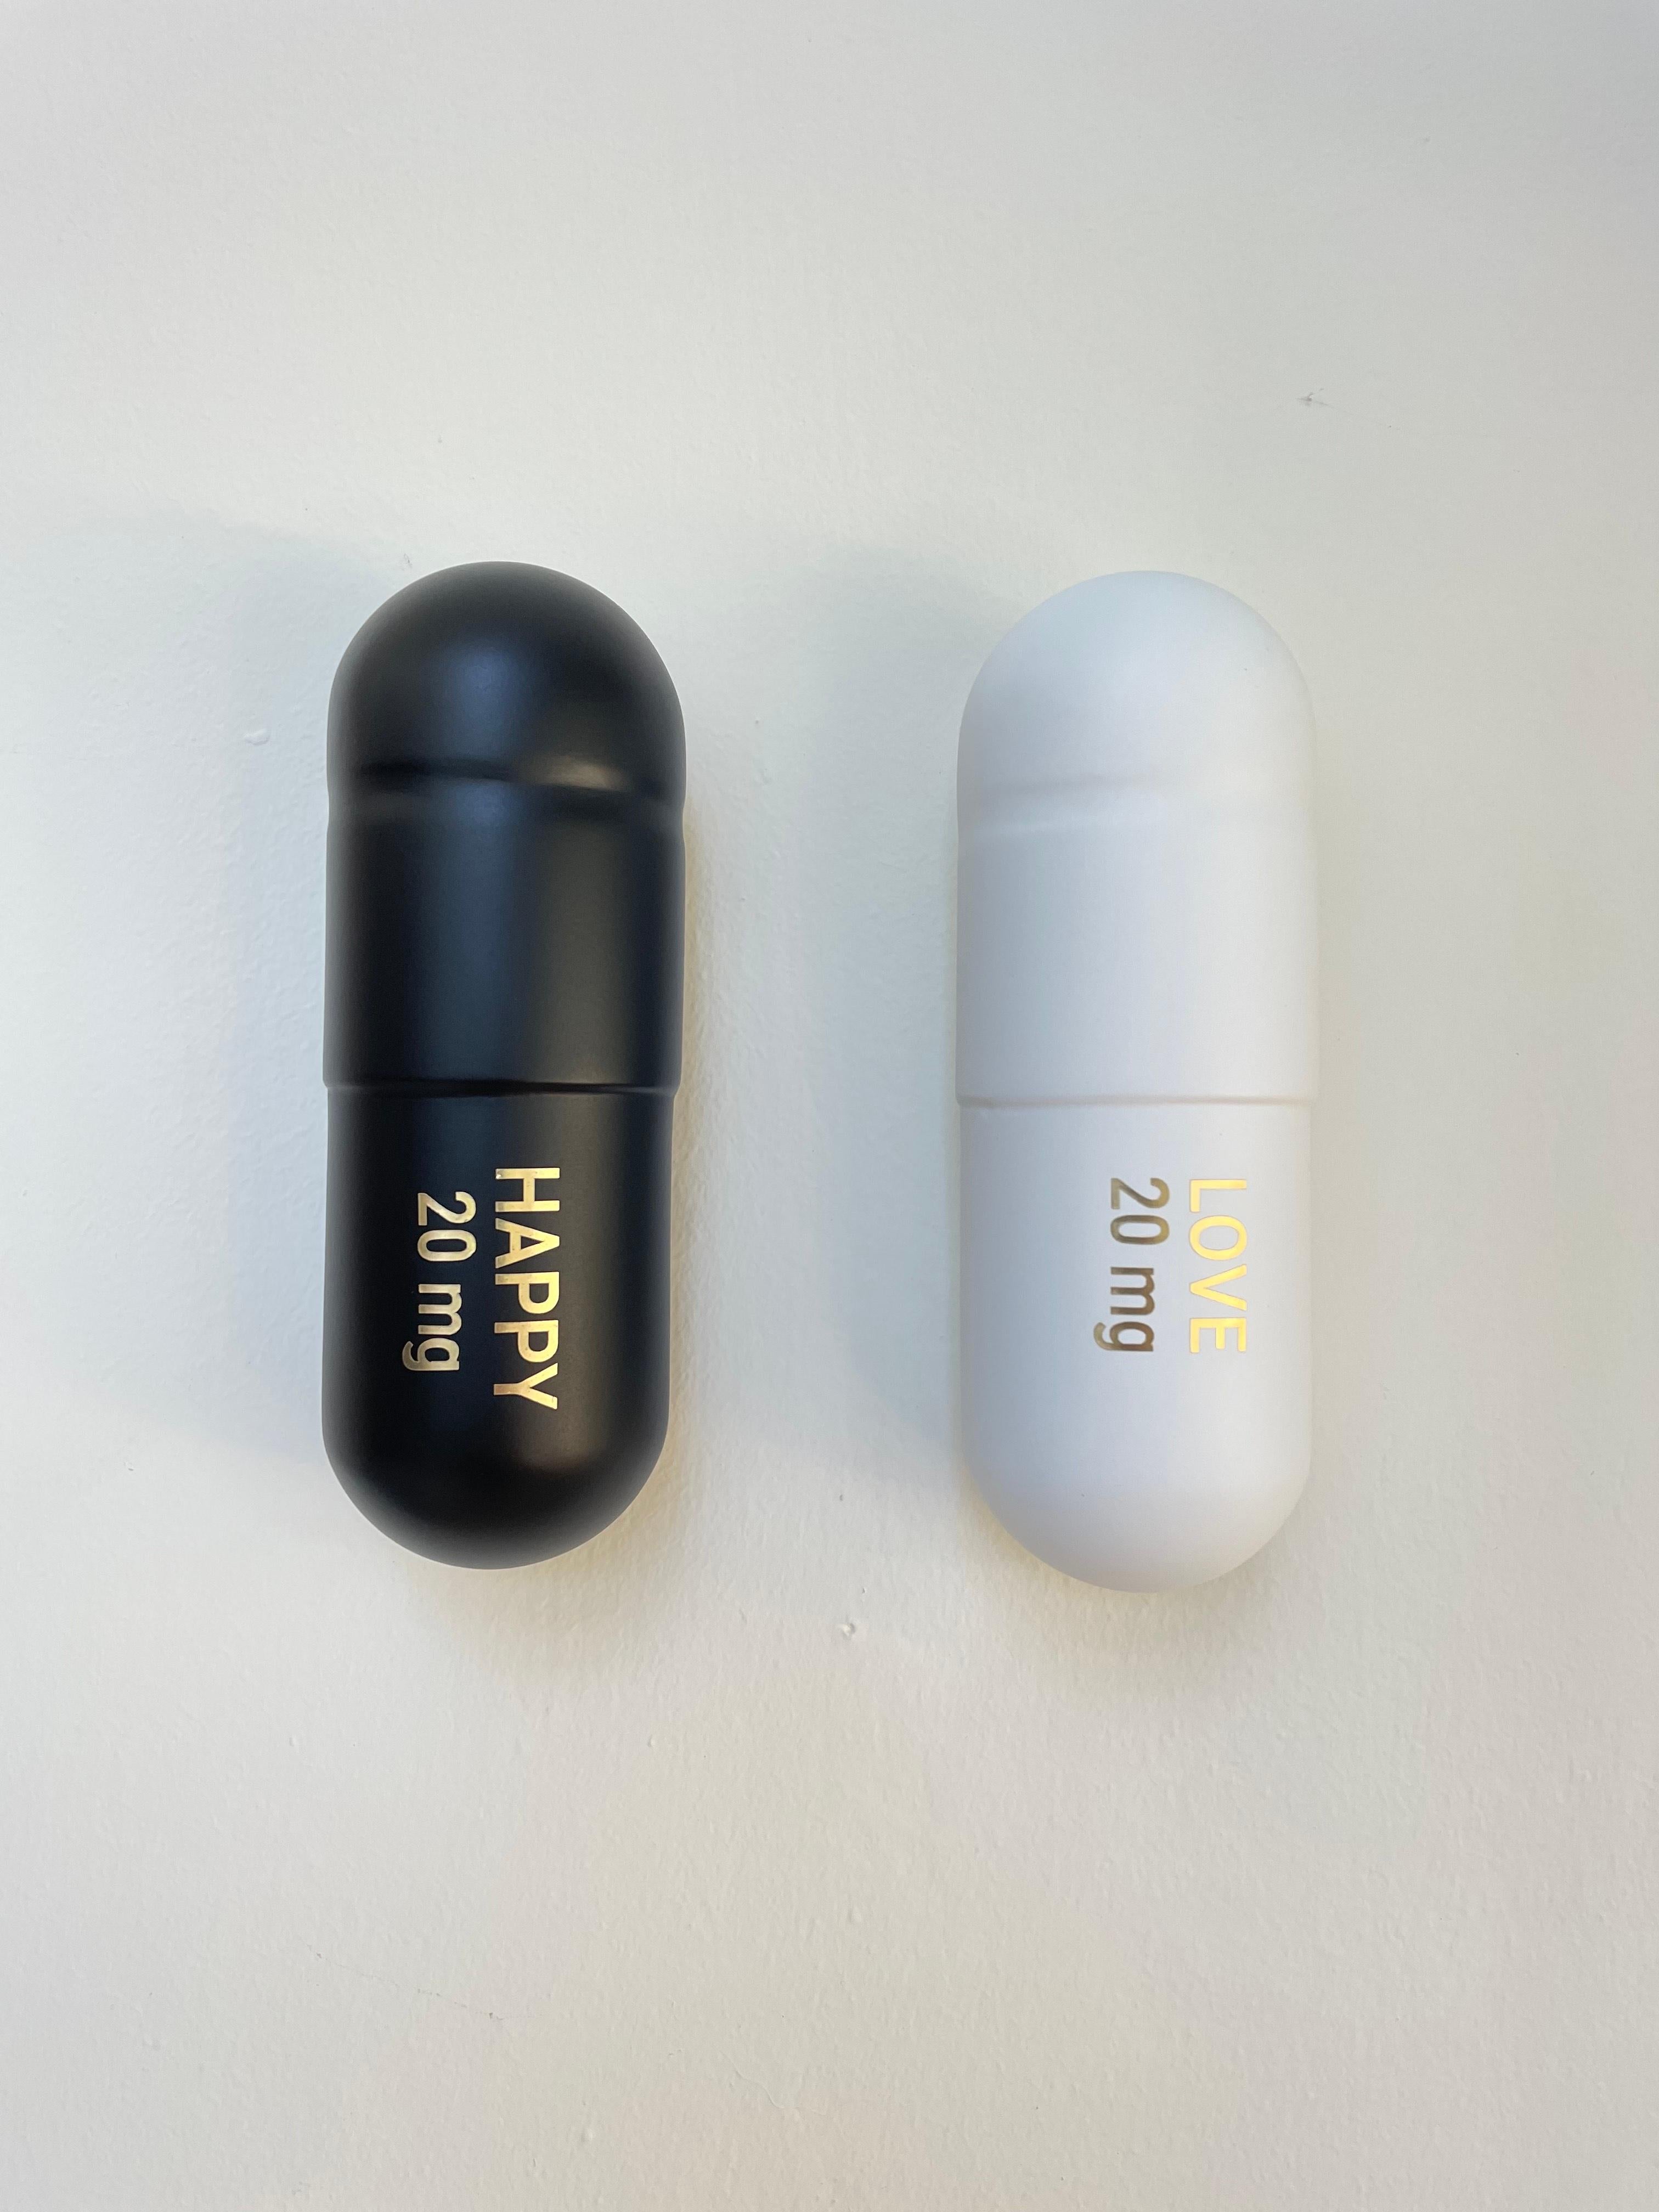 20 ML Happy Love pill Combo (black and white) - figurative sculpture - Pop Art Sculpture by Tal Nehoray